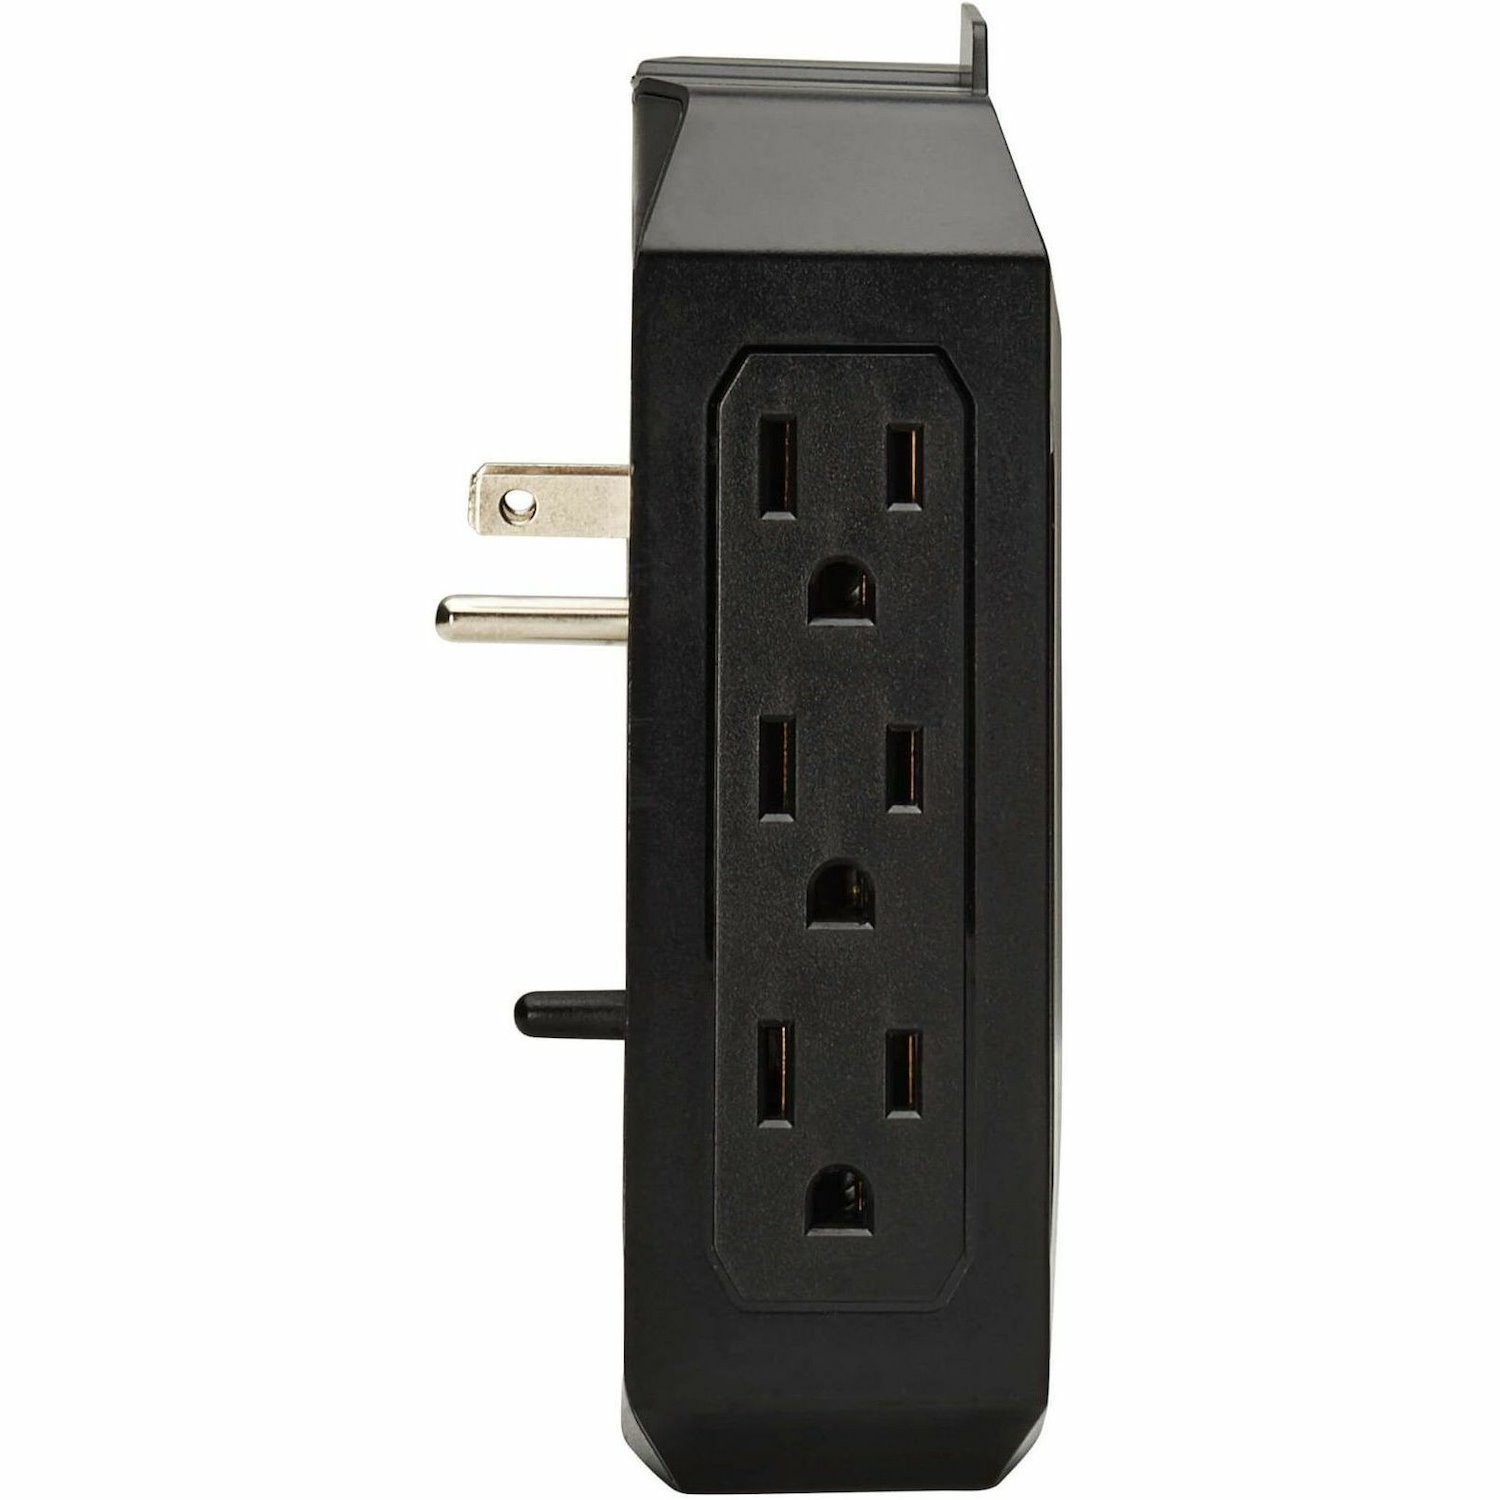 Tripp Lite by Eaton Protect It! 6-Outlet Surge Protector - 5-15R Outlets, 2 USB Ports, 5-15P Direct Plug-In, 490 Joules, Black